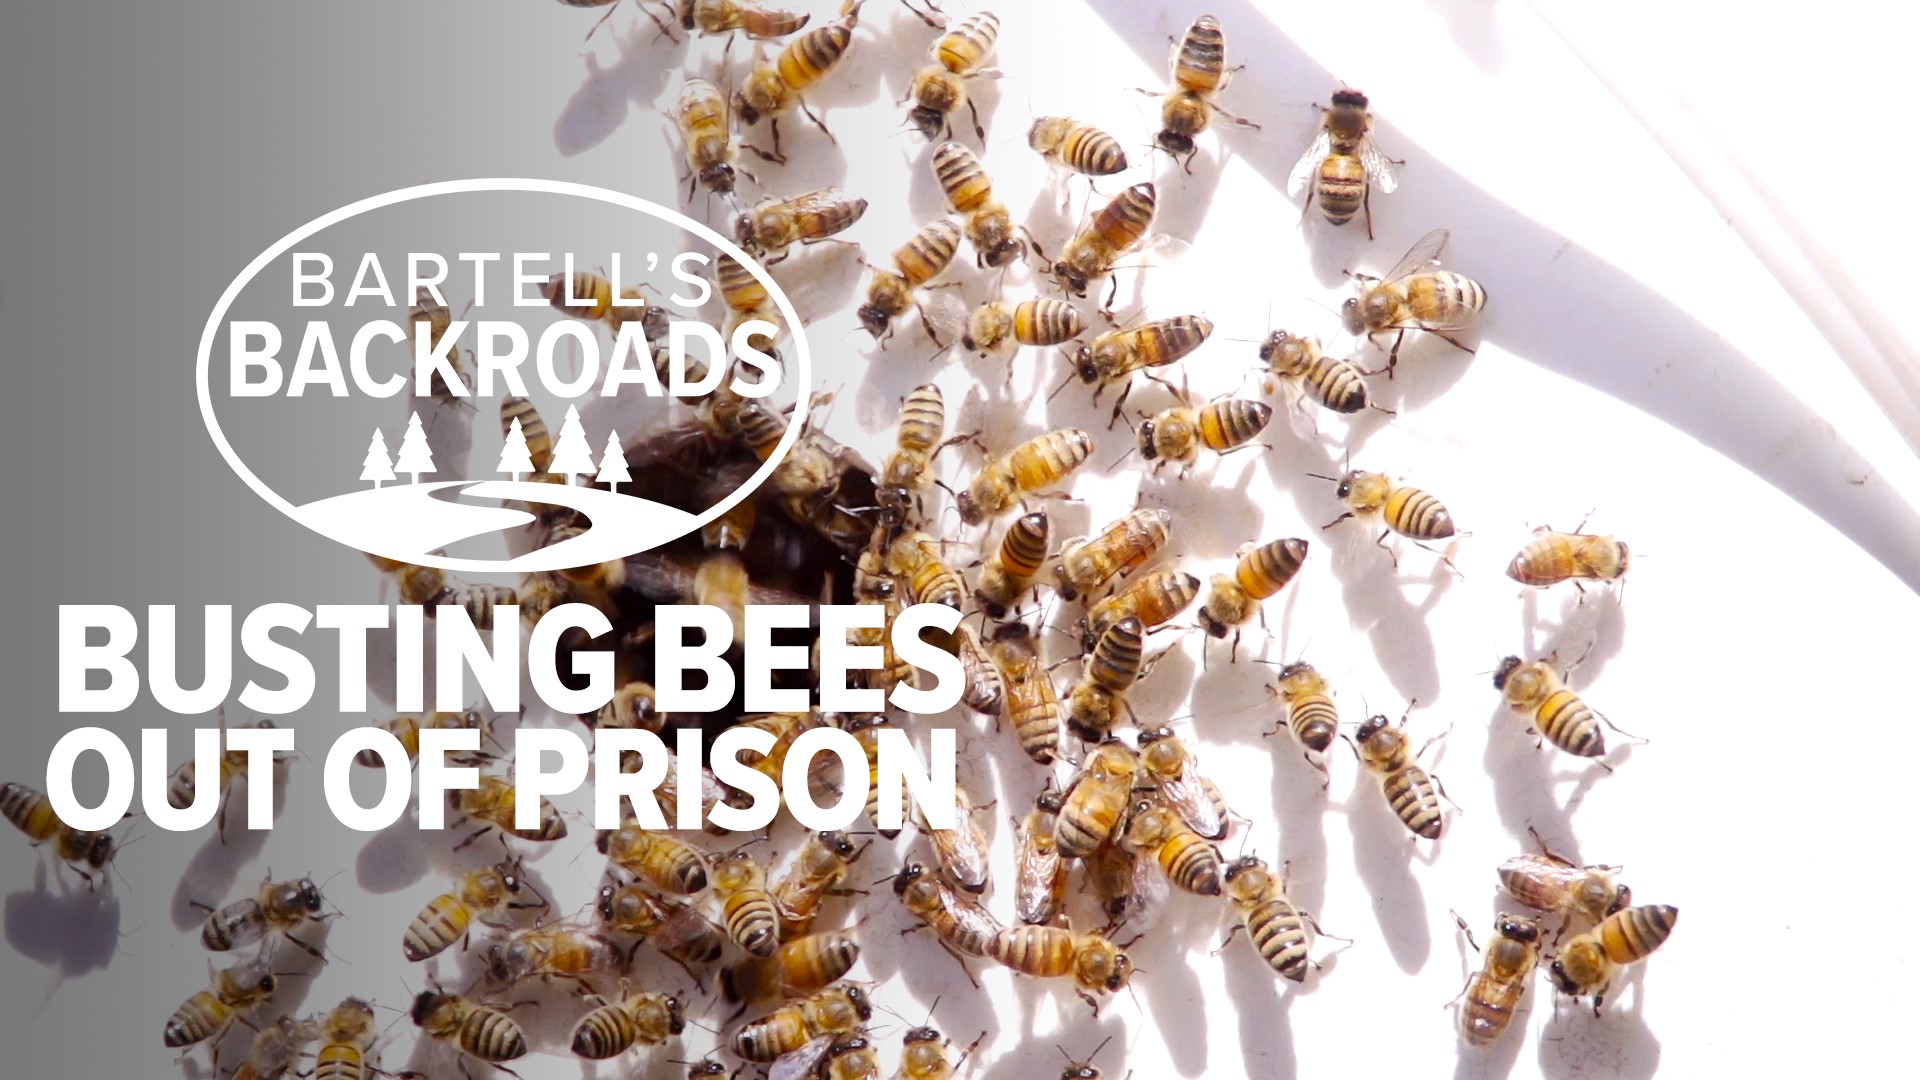 Spring is a busy time for bee rescues. John Bartell learns what it takes.